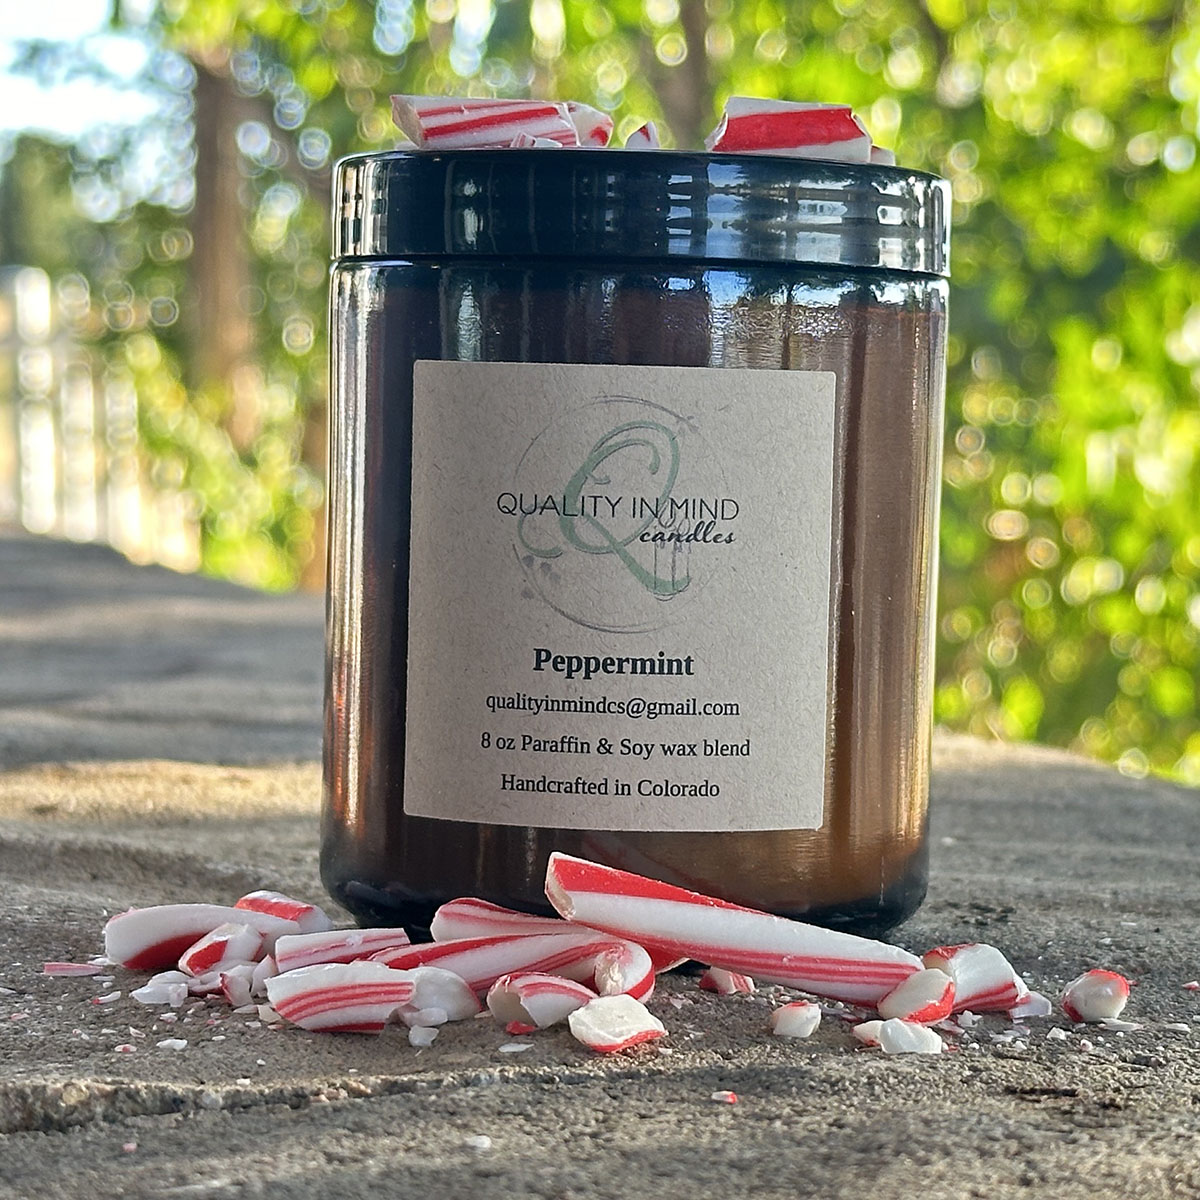 Peppermint Scented Candle in an outdoorsy setting